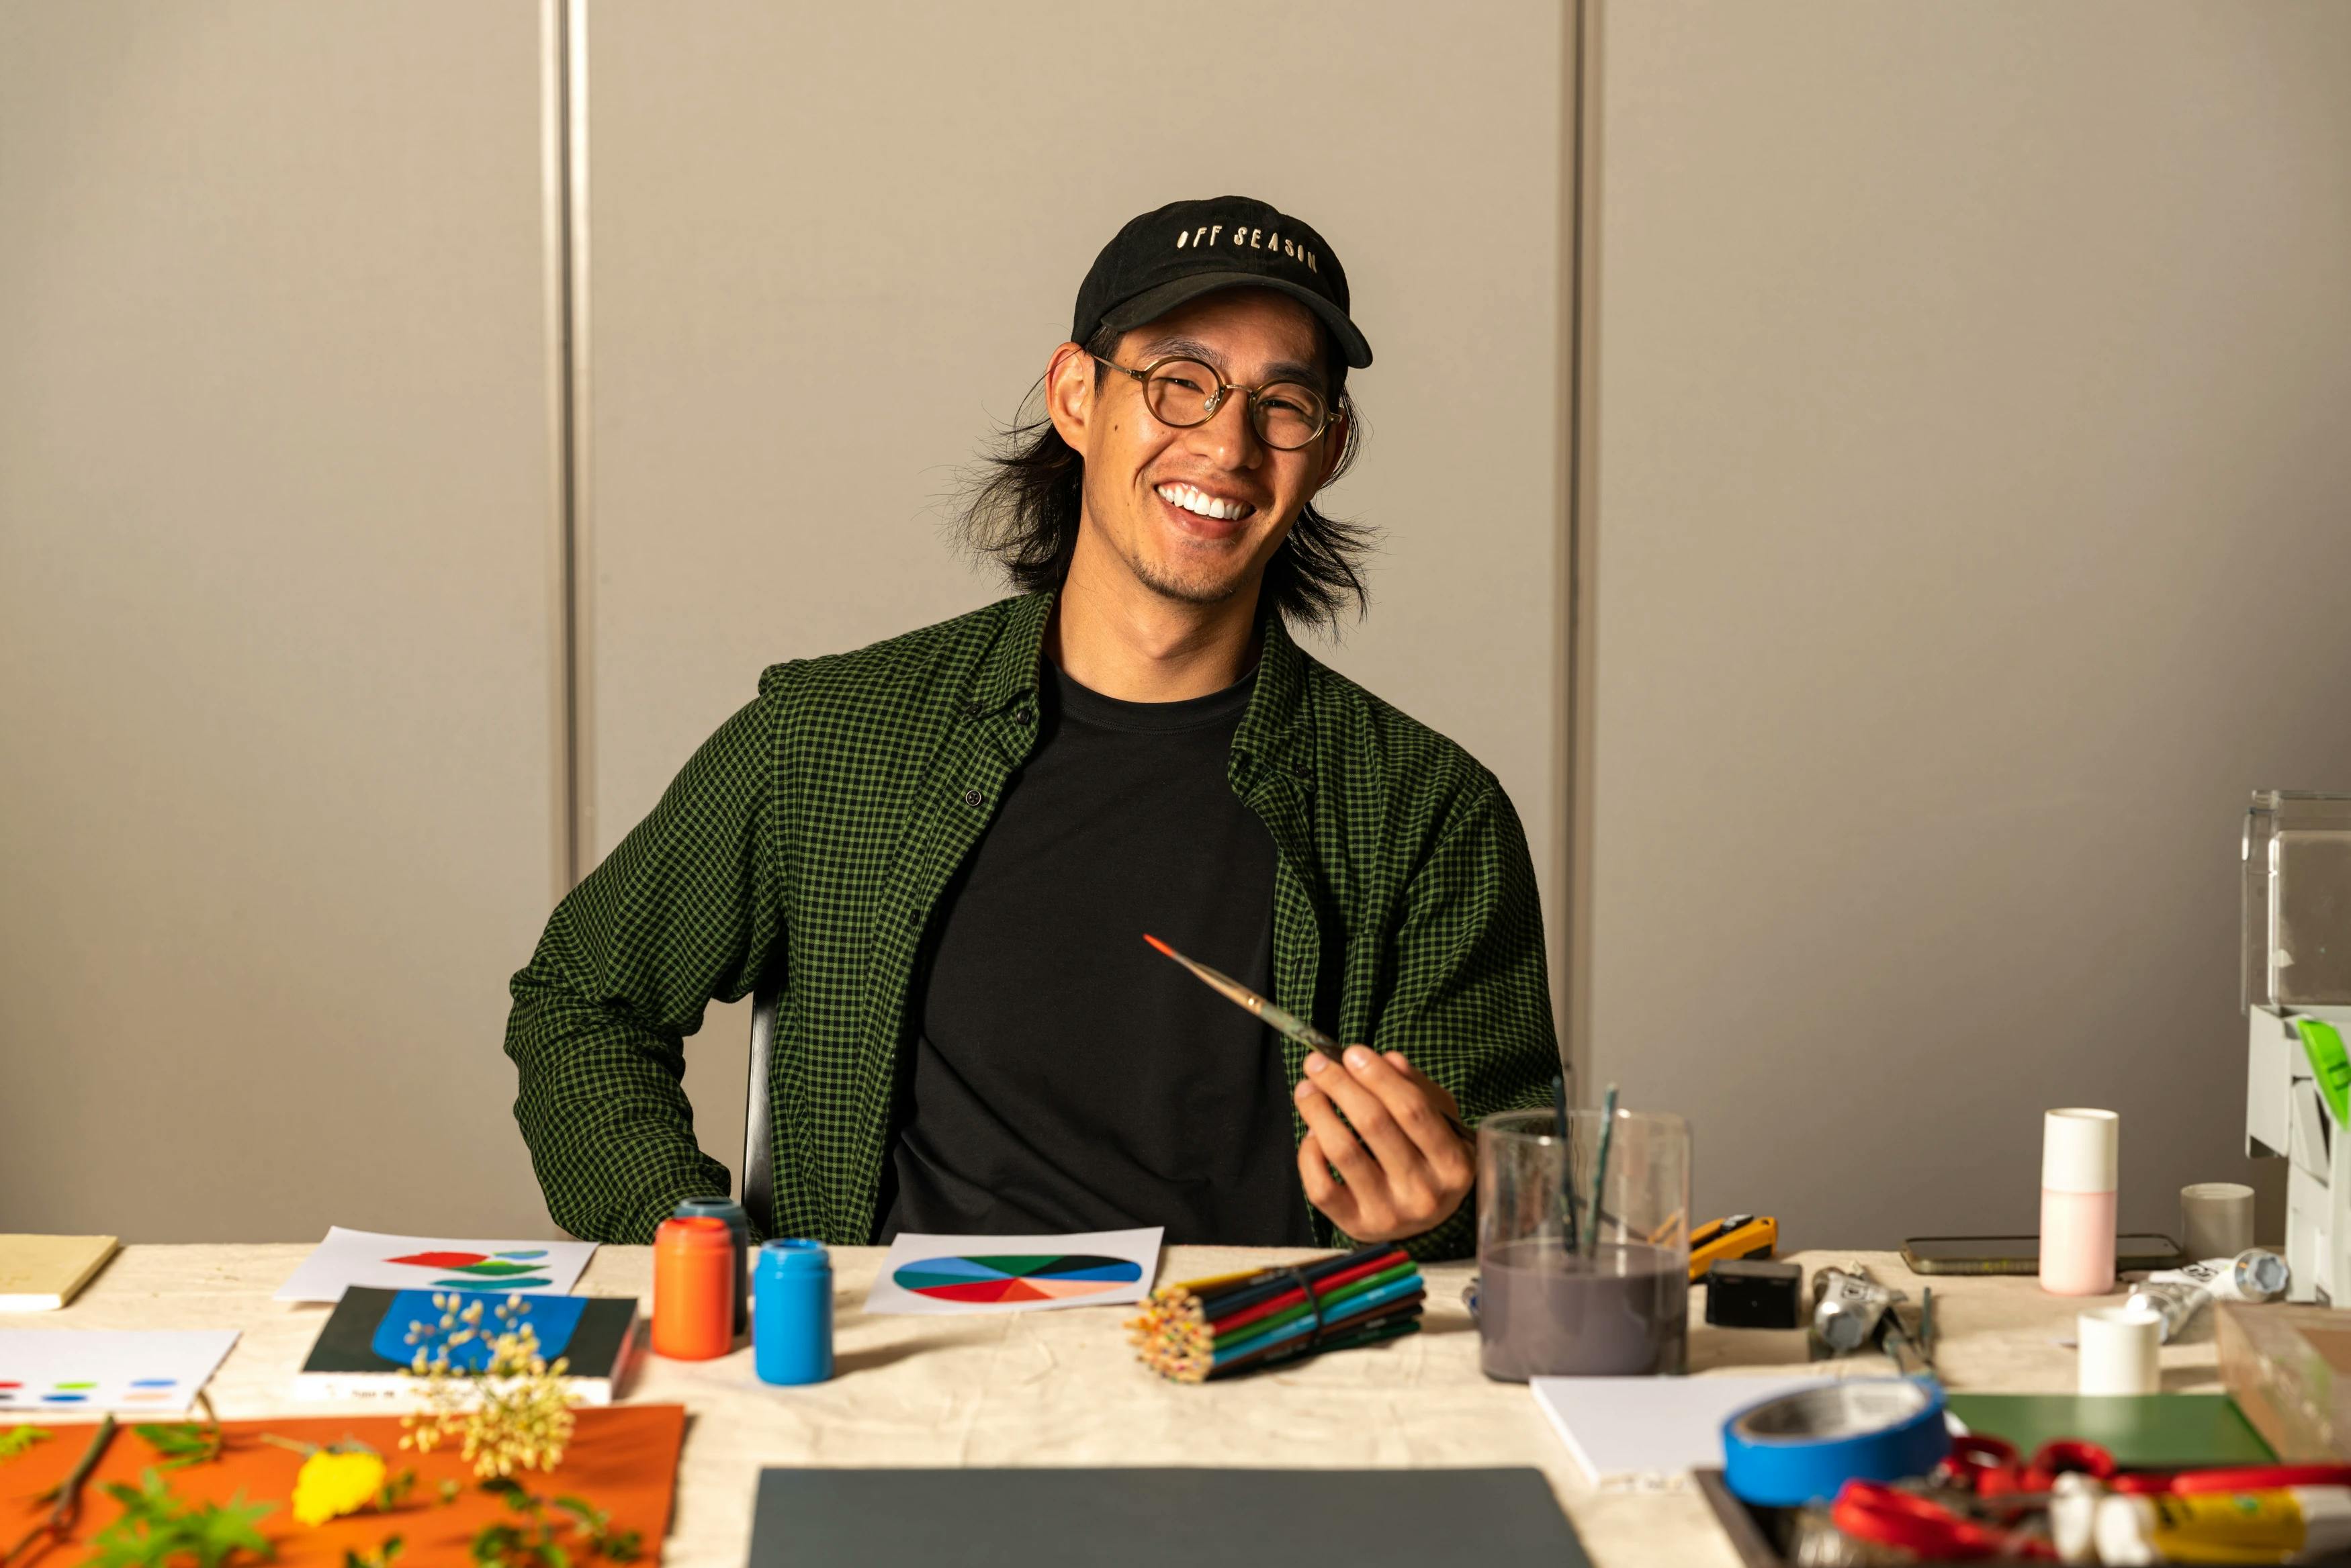 Artist Scott Sueme holding a paintbrush and smiling within his studio at MacArthur Place.